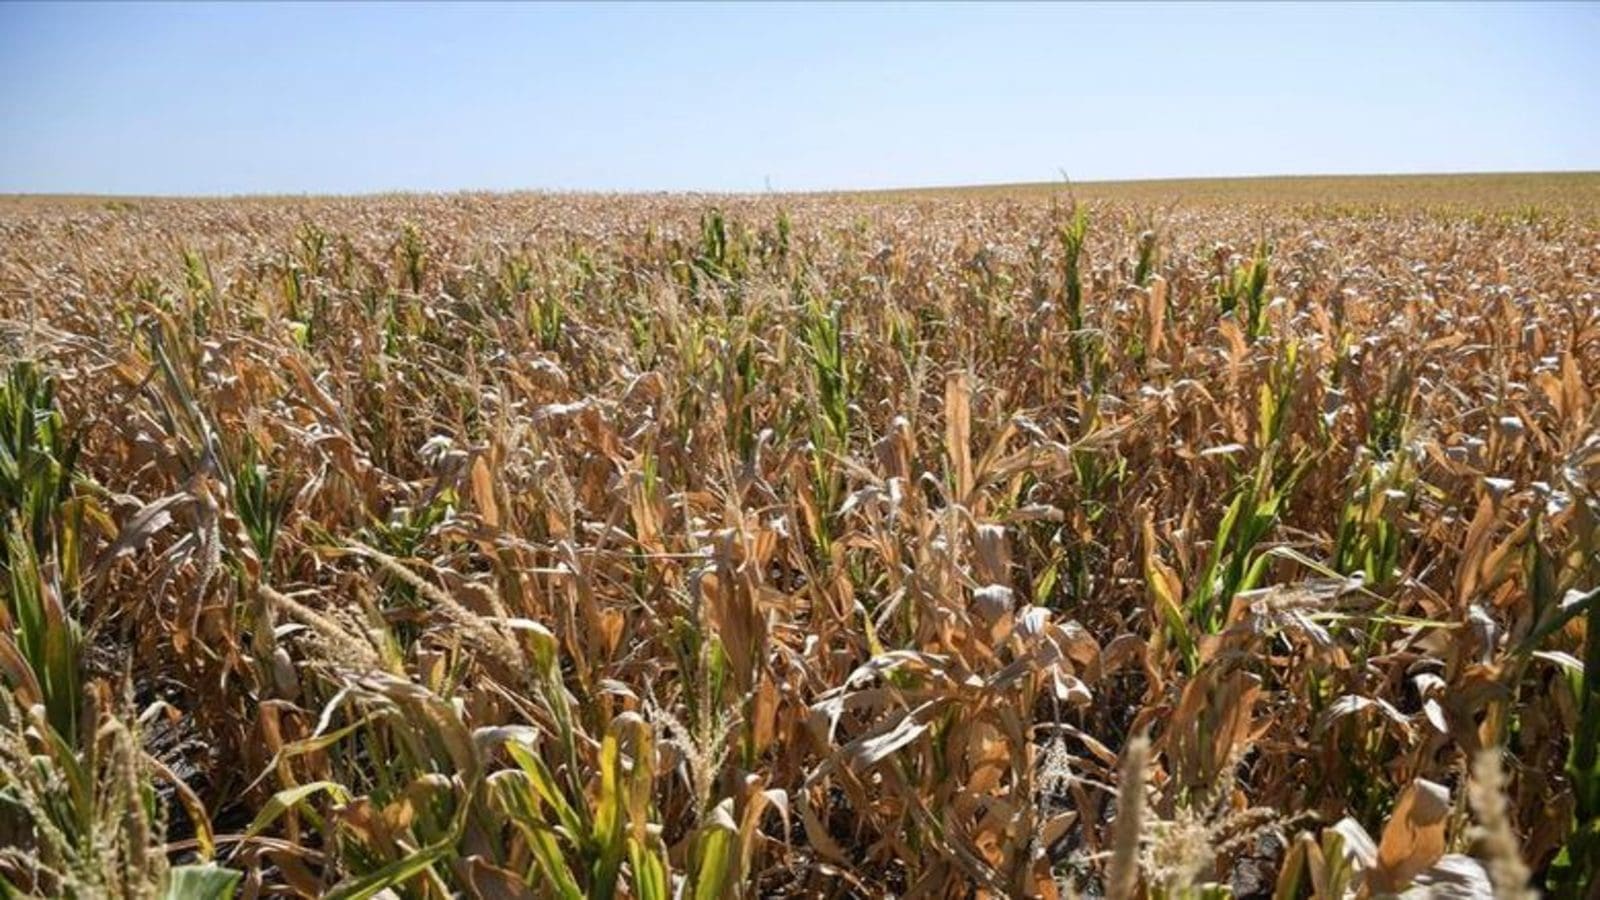 Argentina soybean, corn to decline by up to 25% as drought continues to wreak havoc on farms